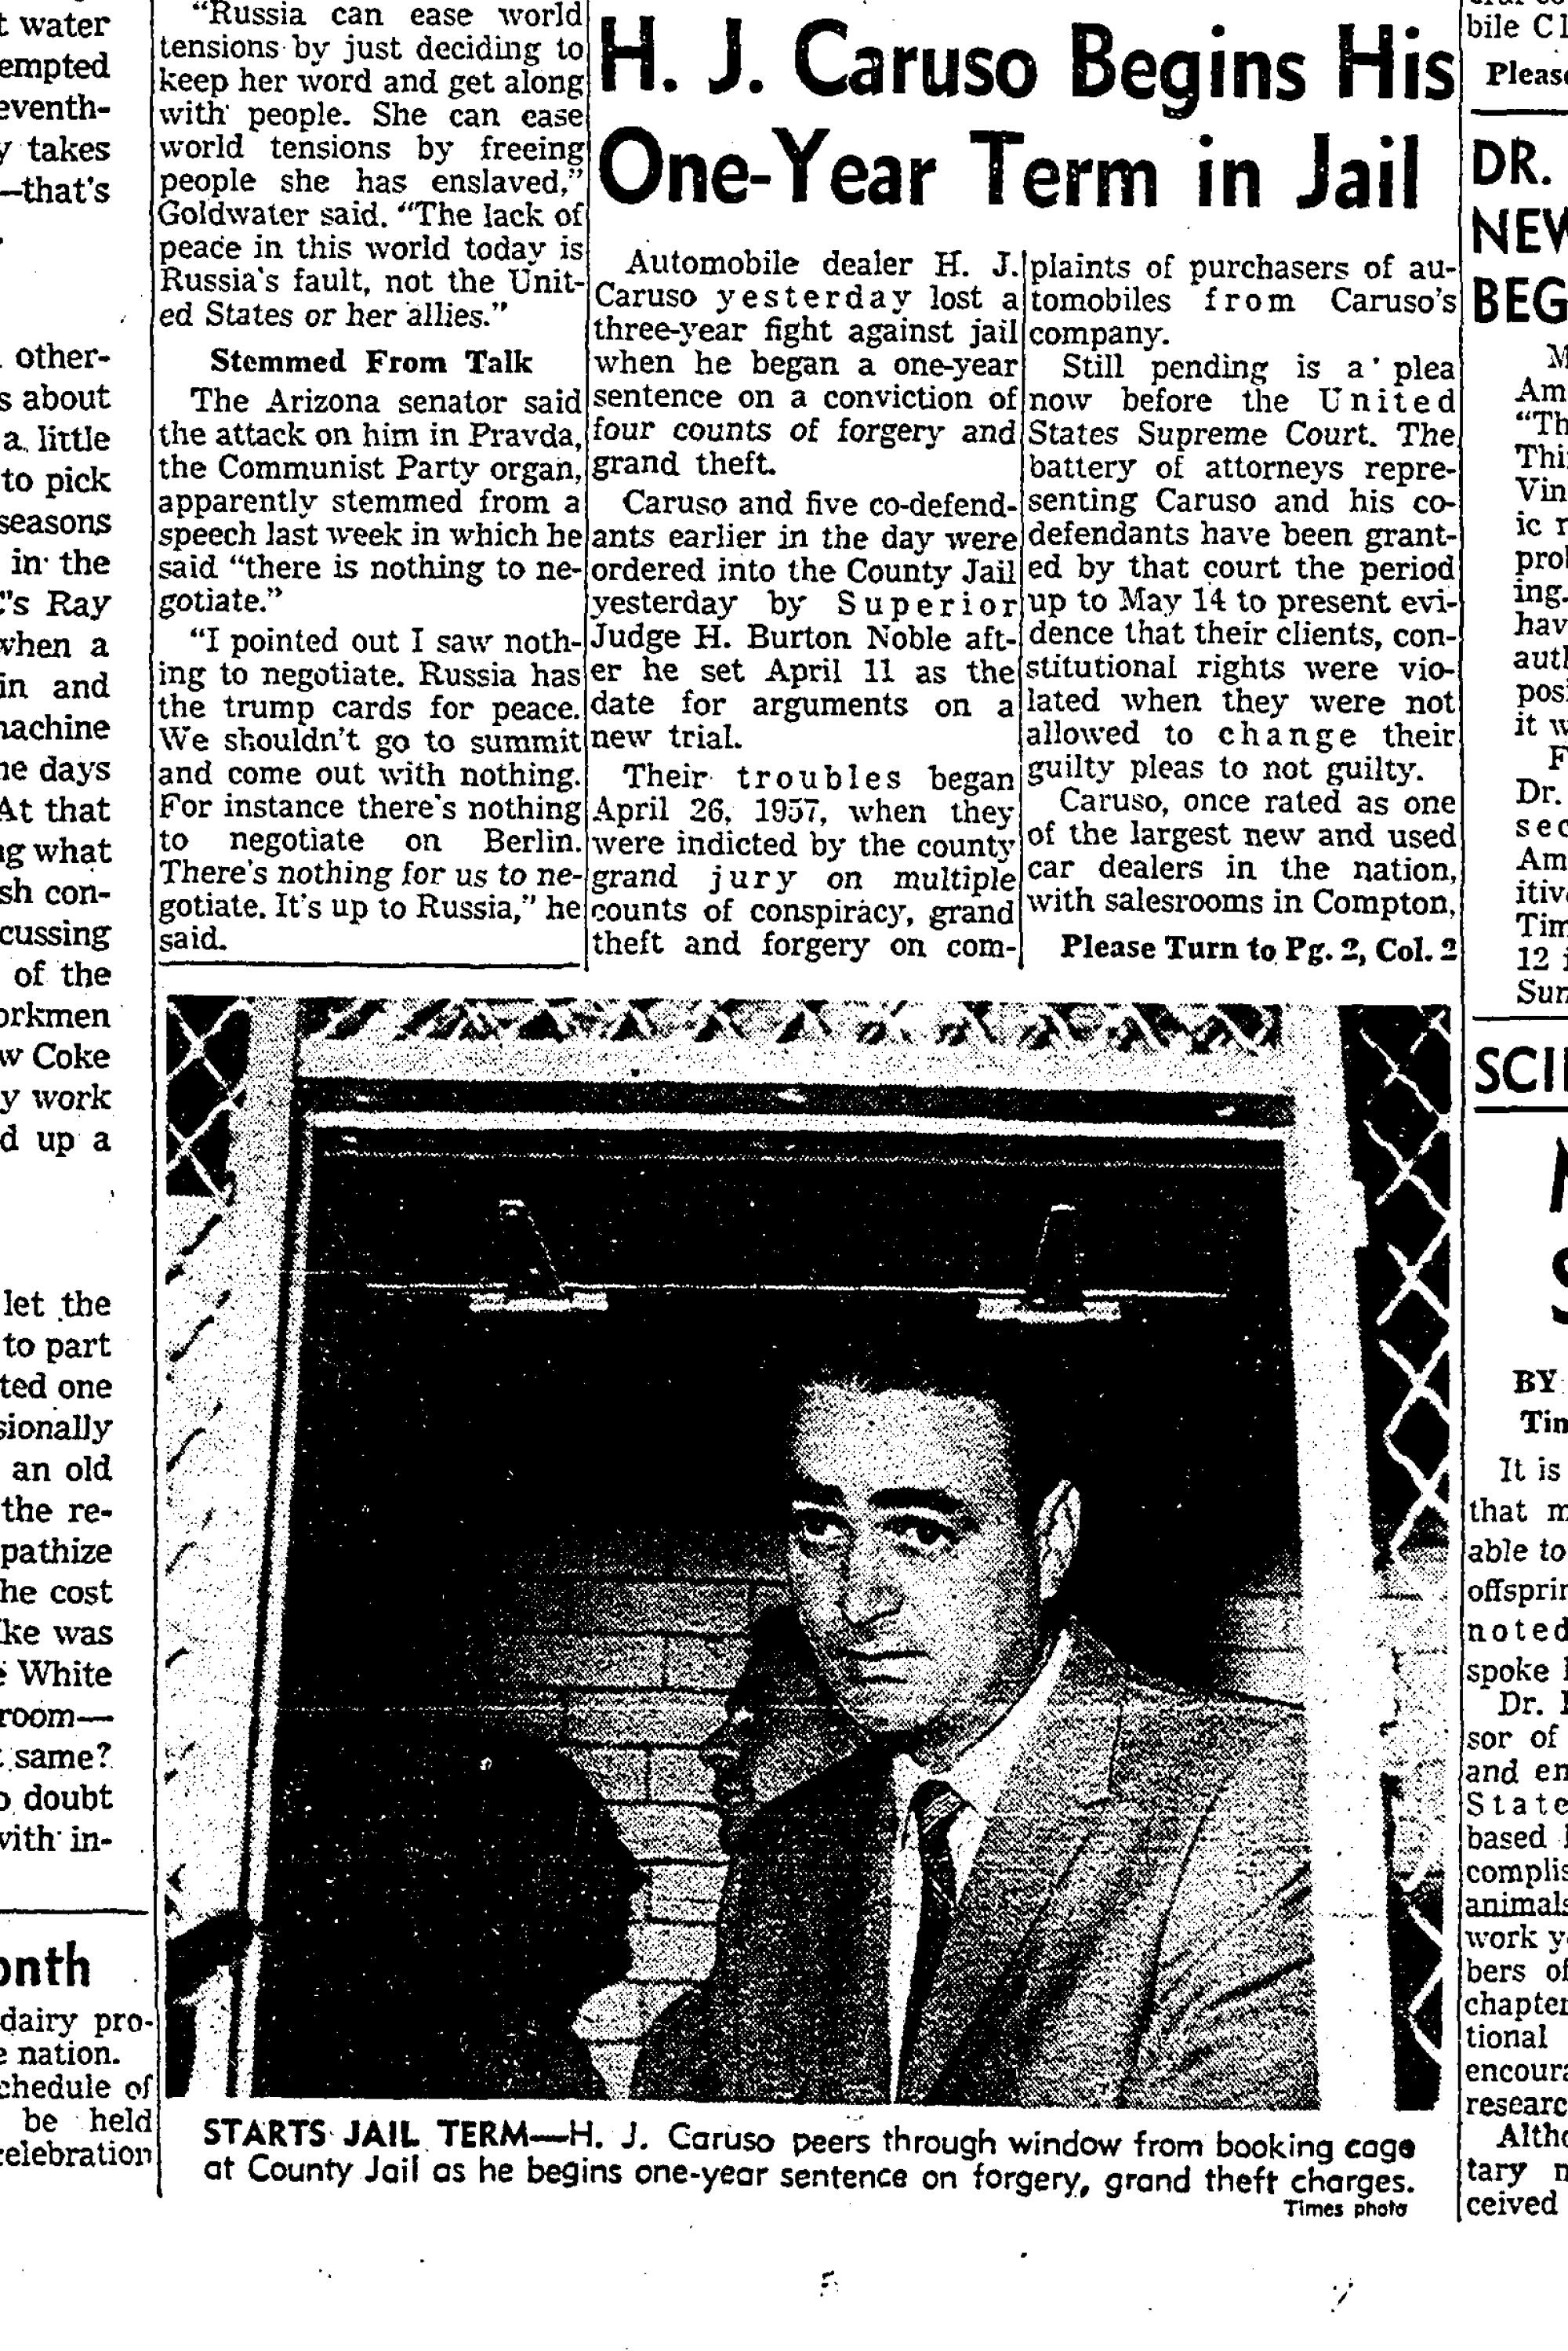 The March 22, 1960, Los Angeles Times with the headline of Henry Caruso beginning his jail term.